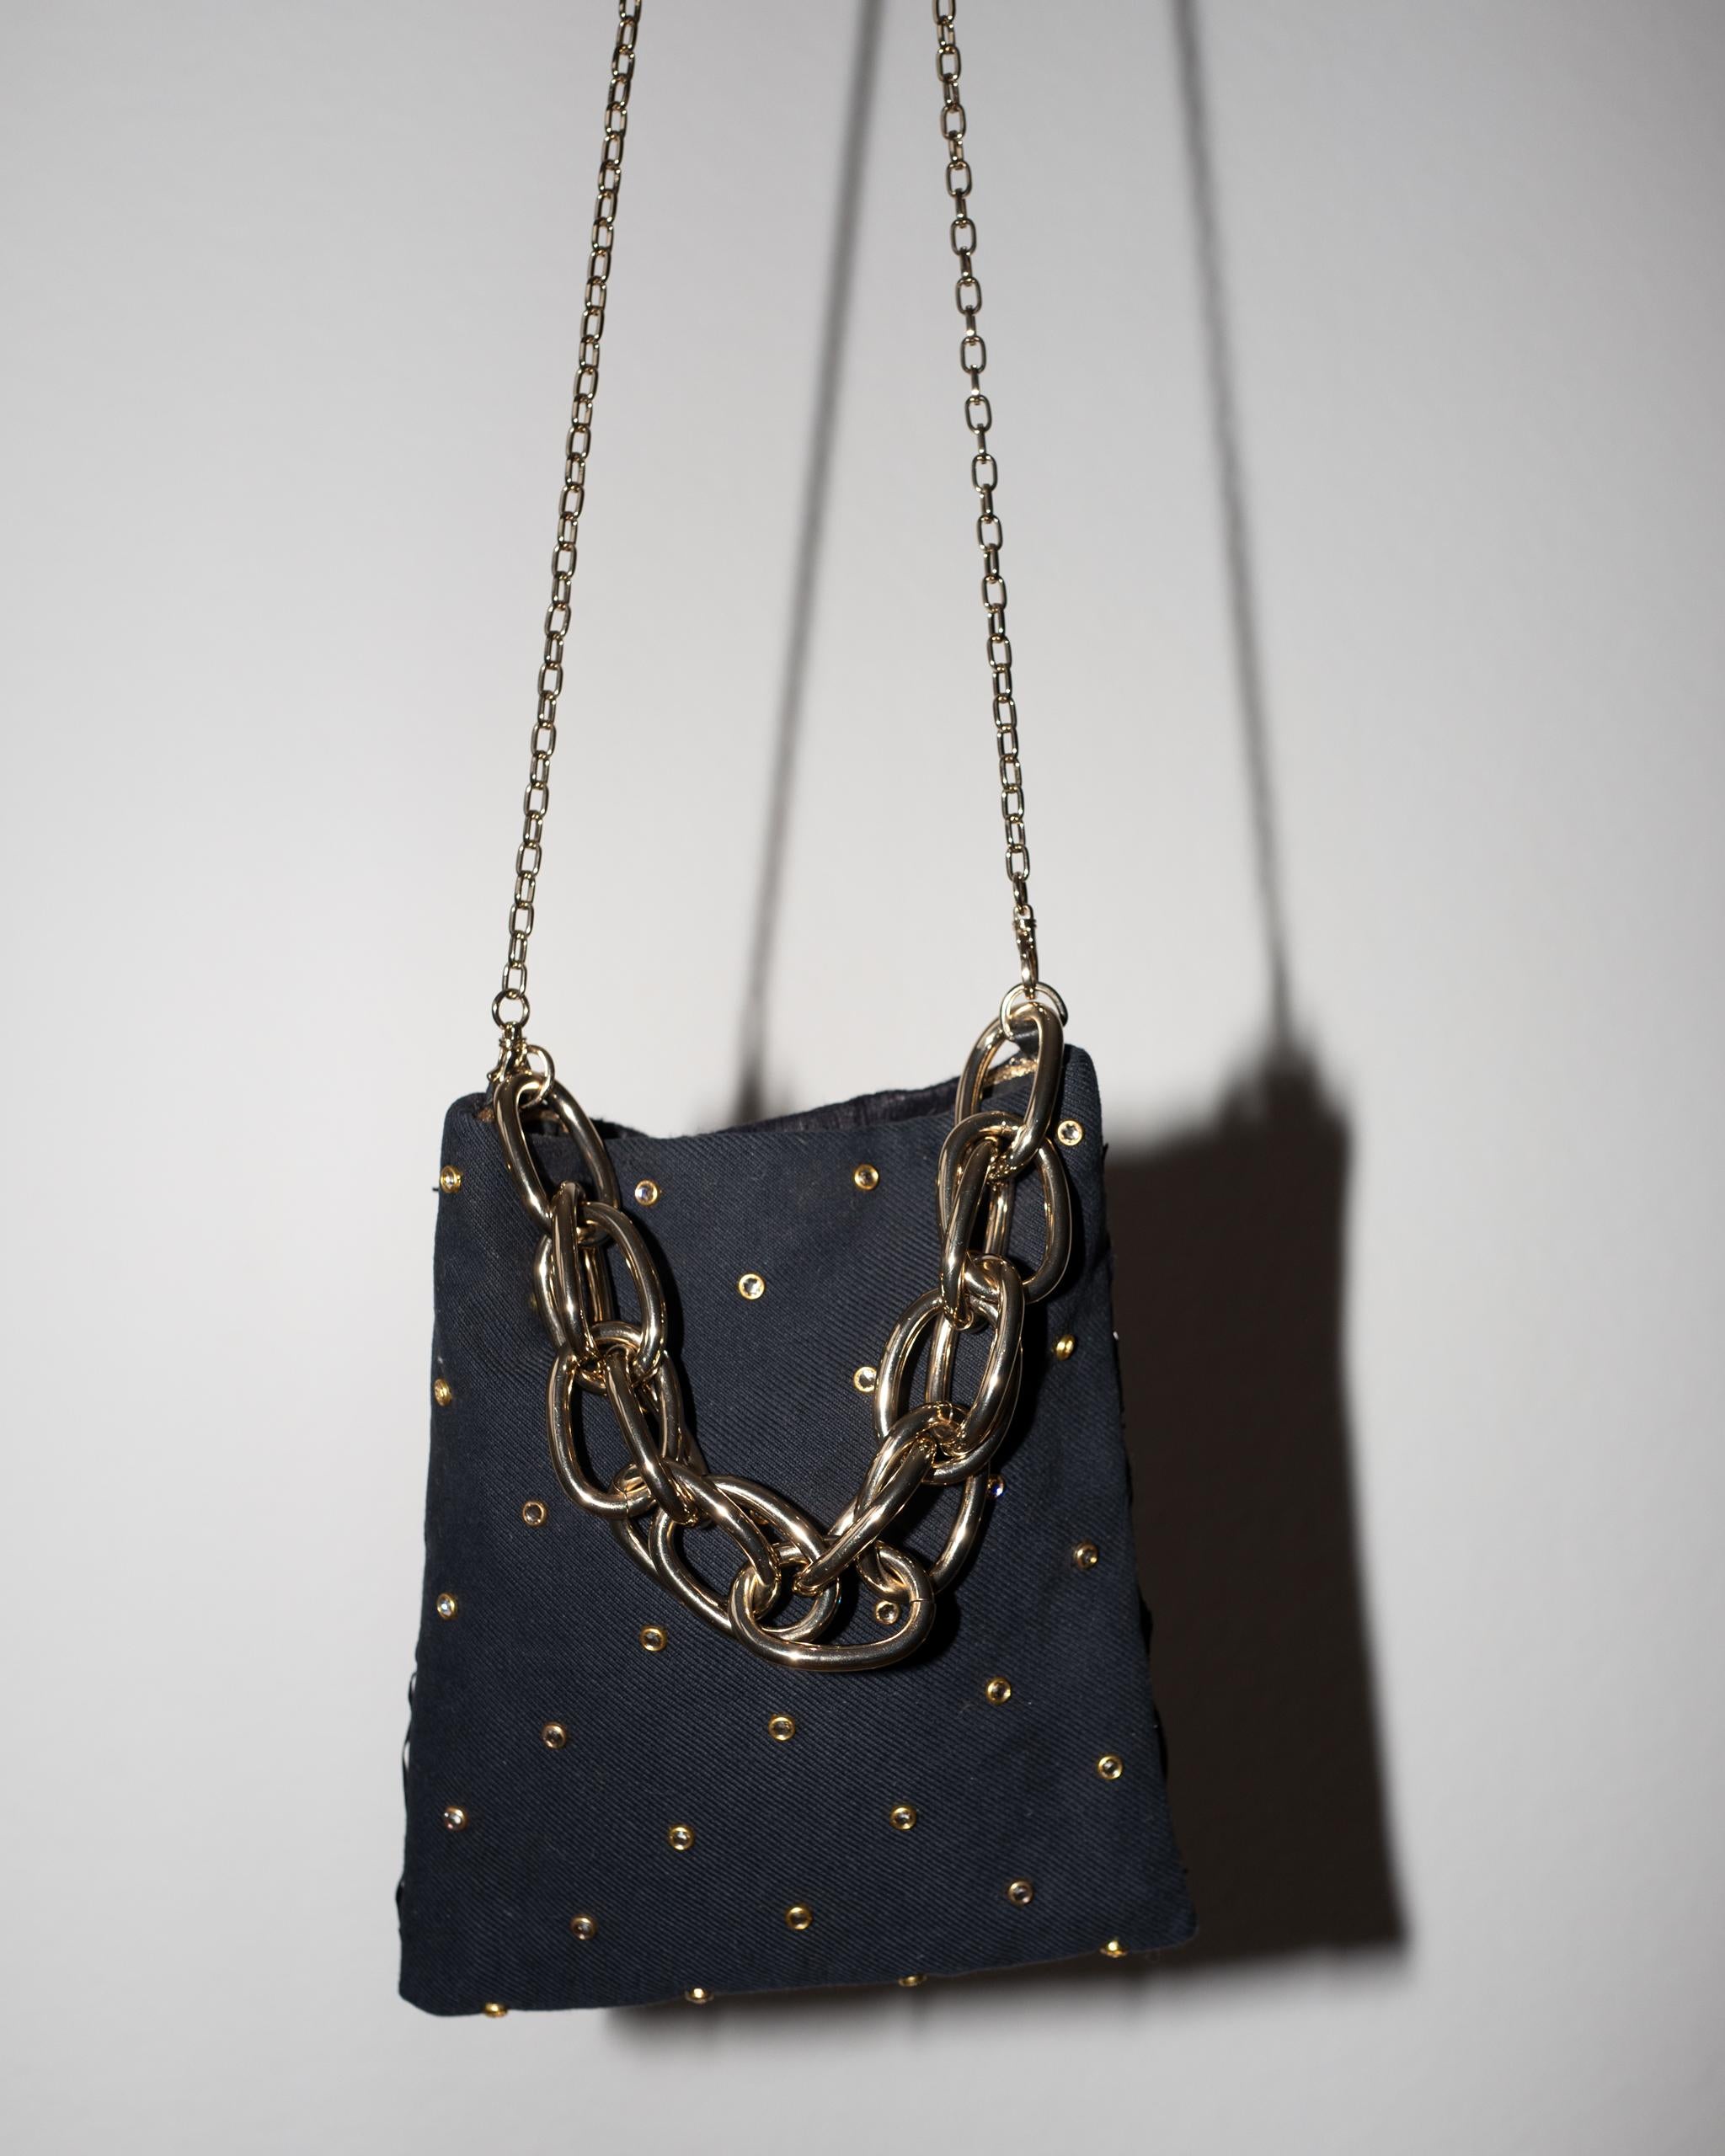 Crystal Swarovski Embellishment Black French Tweed Gold Chain Shoulder Bag In New Condition For Sale In Los Angeles, CA